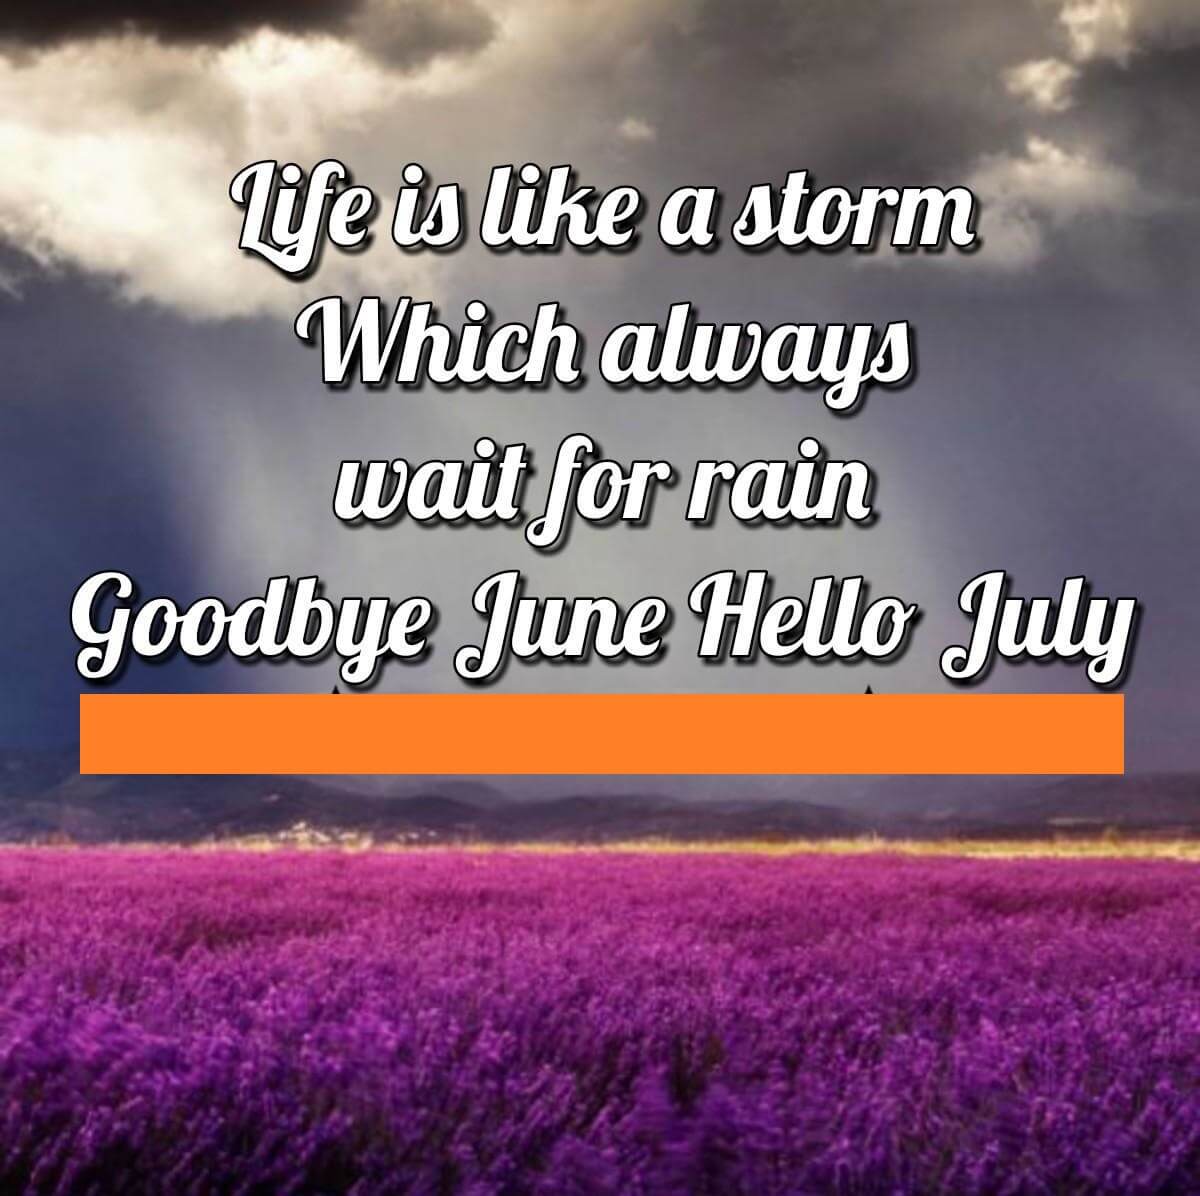 Goodbye June Hello July Quote